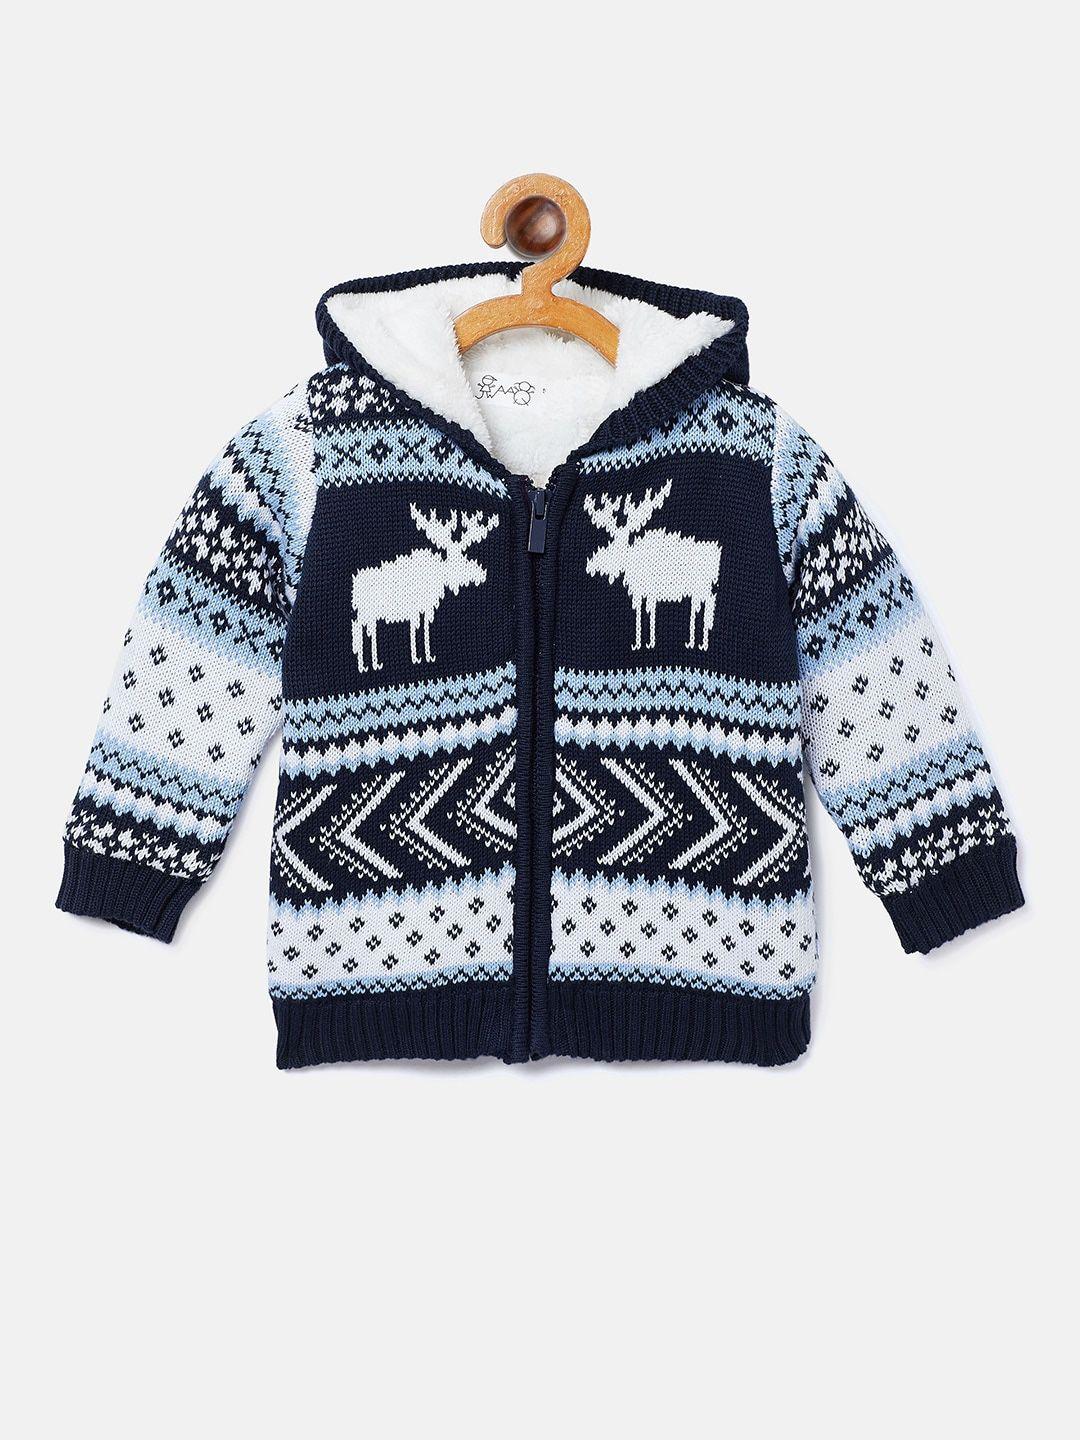 jwaaq boys navy blue & white fair isle pure cotton front-open sweater